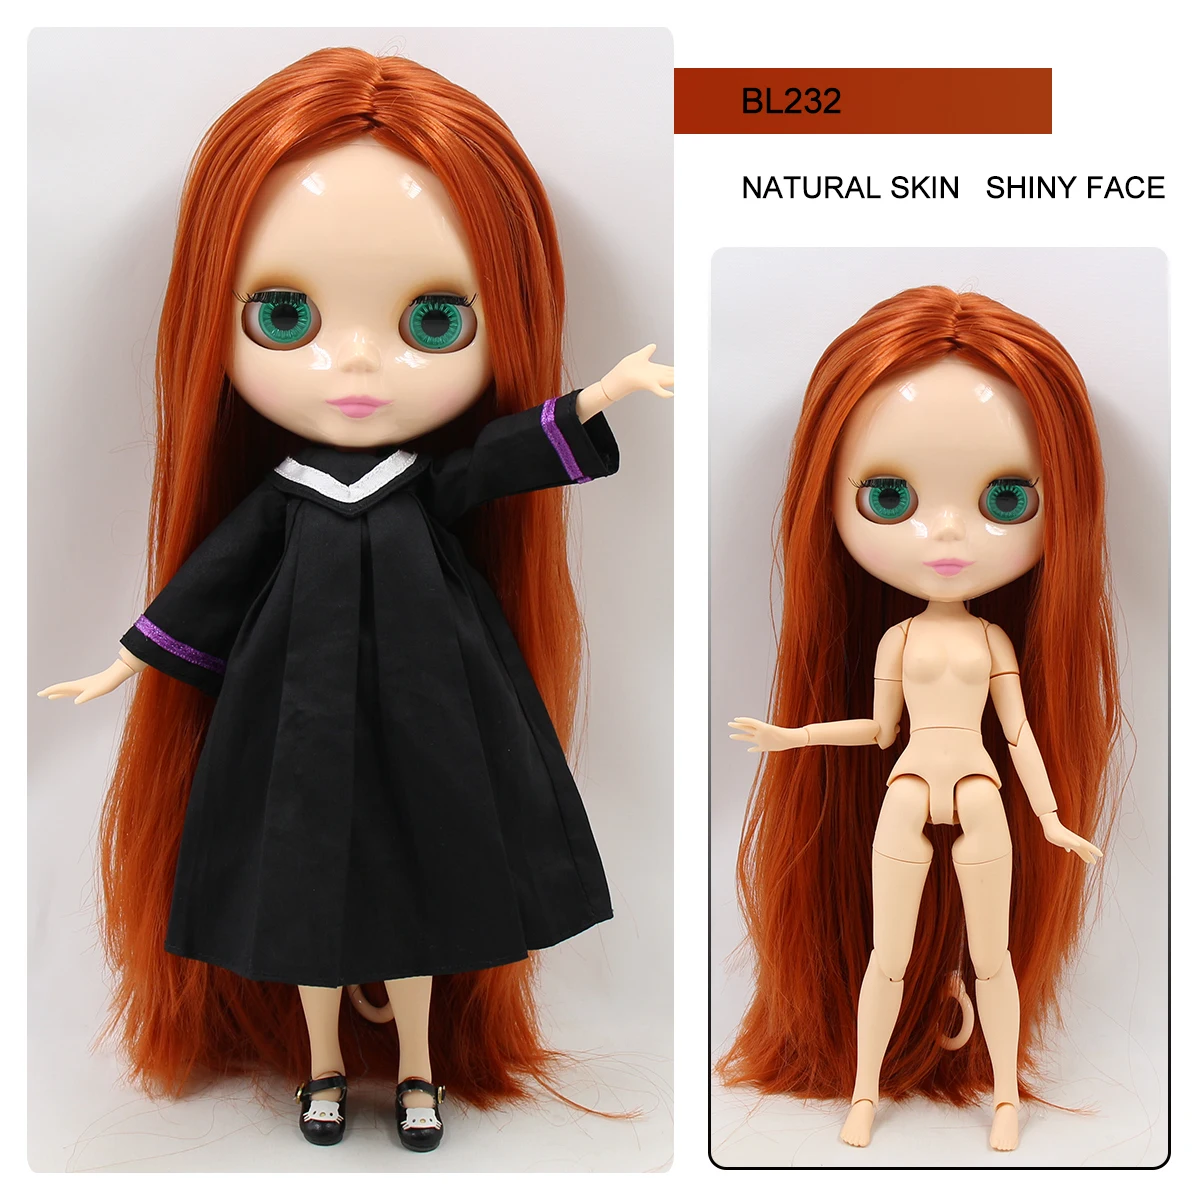 Neo Blythe Doll with Ginger Hair, Natural Skin, Shiny Cute Face & Custom Jointed Body 1